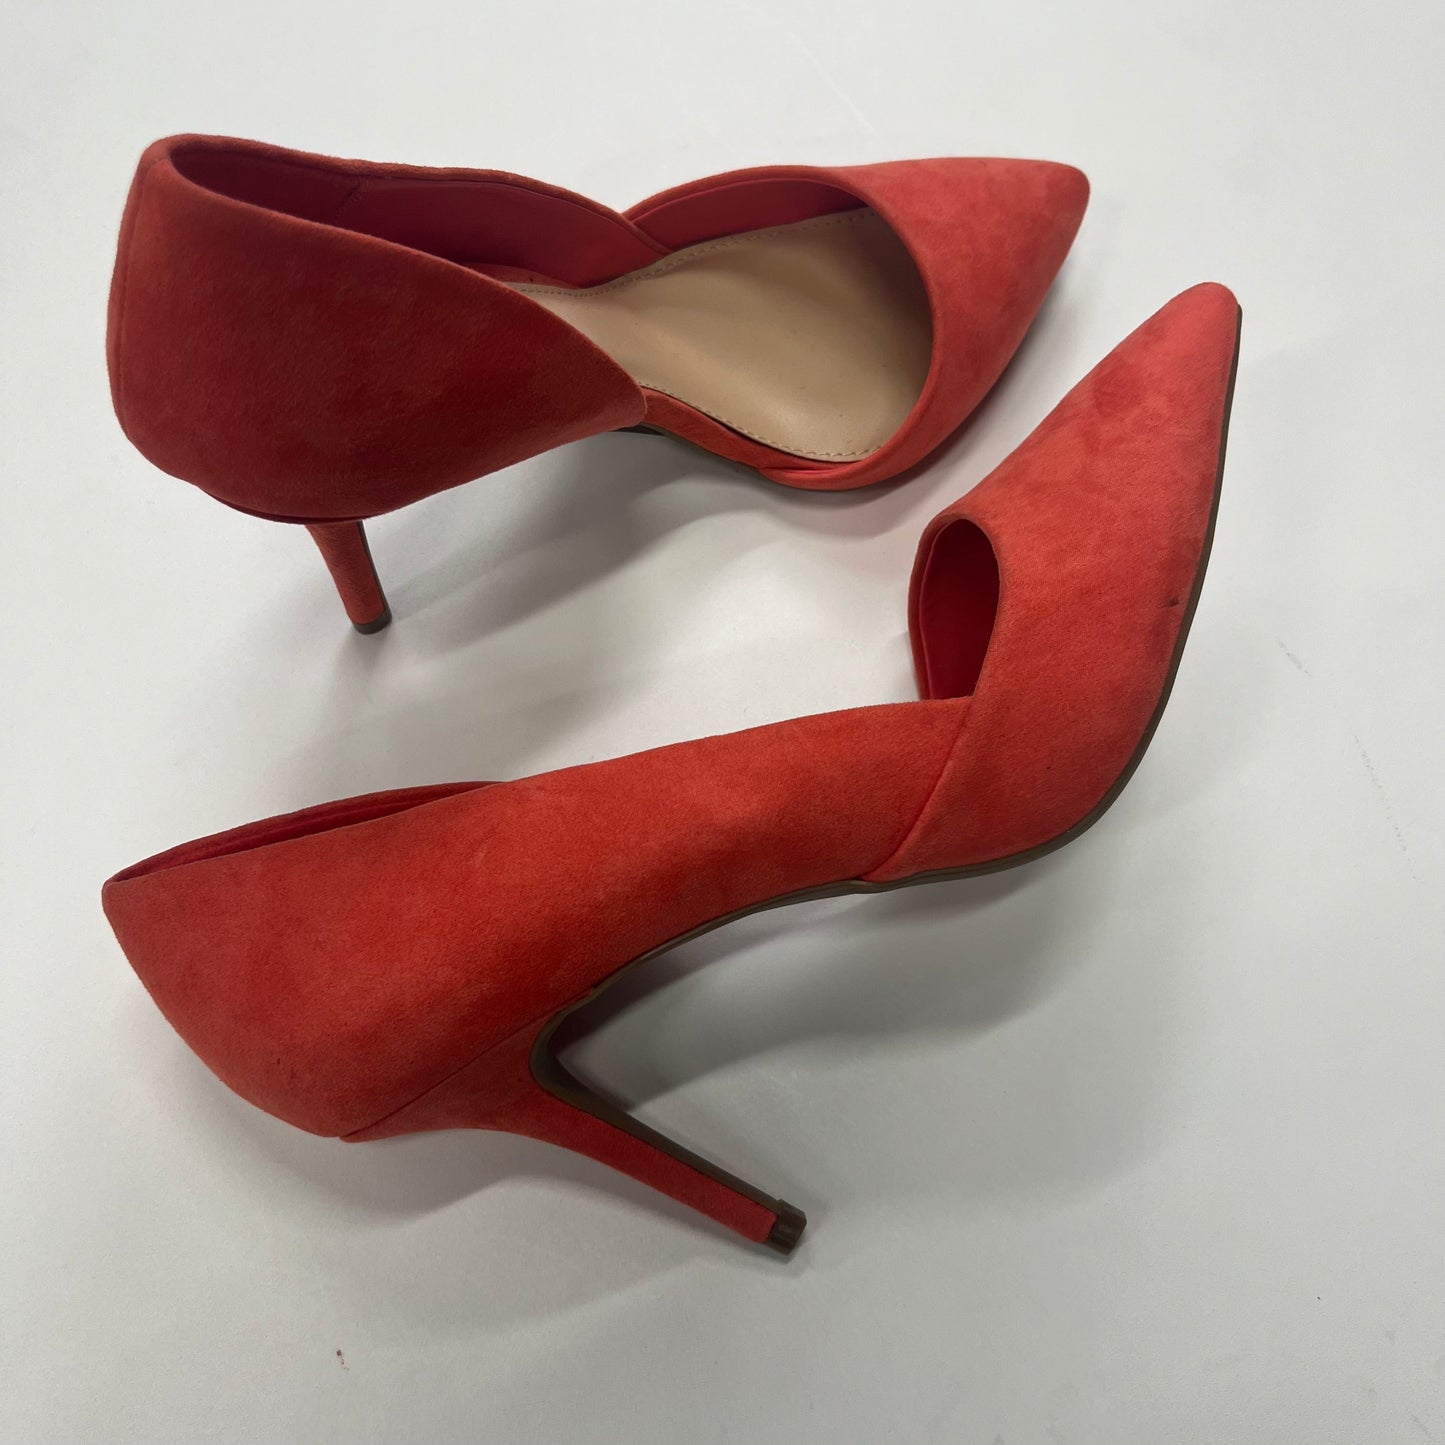 Shoes Heels Stiletto By Old Navy  Size: 10